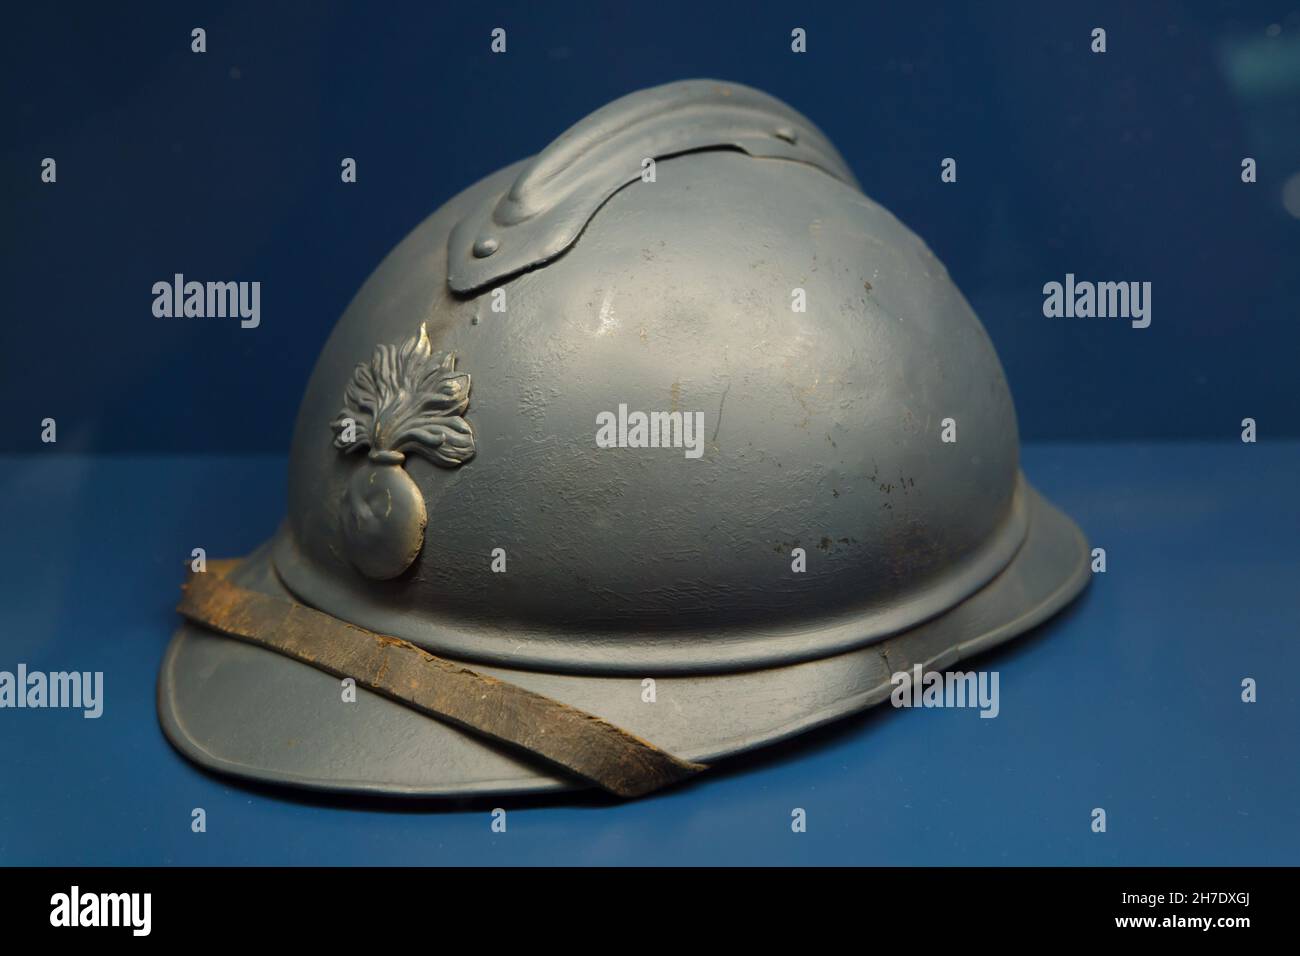 French military helmet known as the Adrian helmet (Casque Adrian) on display in the Armistice Museum in the Forest of Compiègne (Forêt de Compiègne) near Compiègne in France. The Armistice Museum is located on the ground of the Glade of the Armistice where the Armistice of 11 November 1918 that ended the First World War was signed. Stock Photo